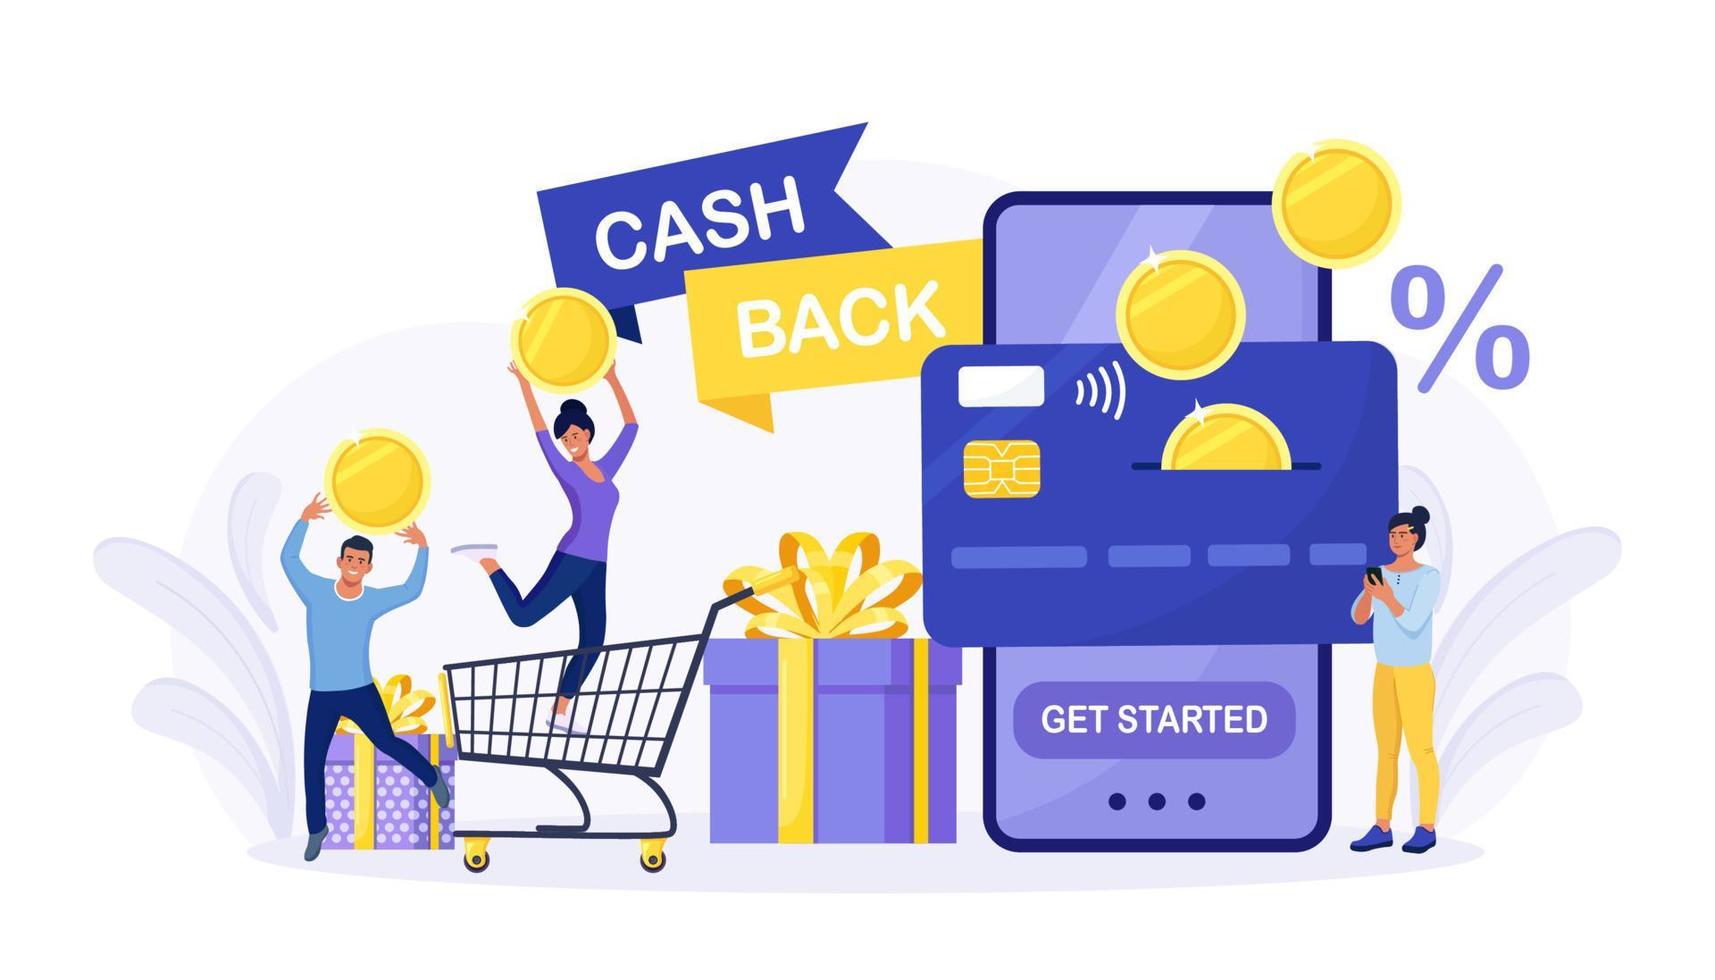 Online cash back or money refund concept. Happy people receiving cashback for shopping. Big phone with button get started the cashback. Saving money, get vouchers and discounts, reward program vector